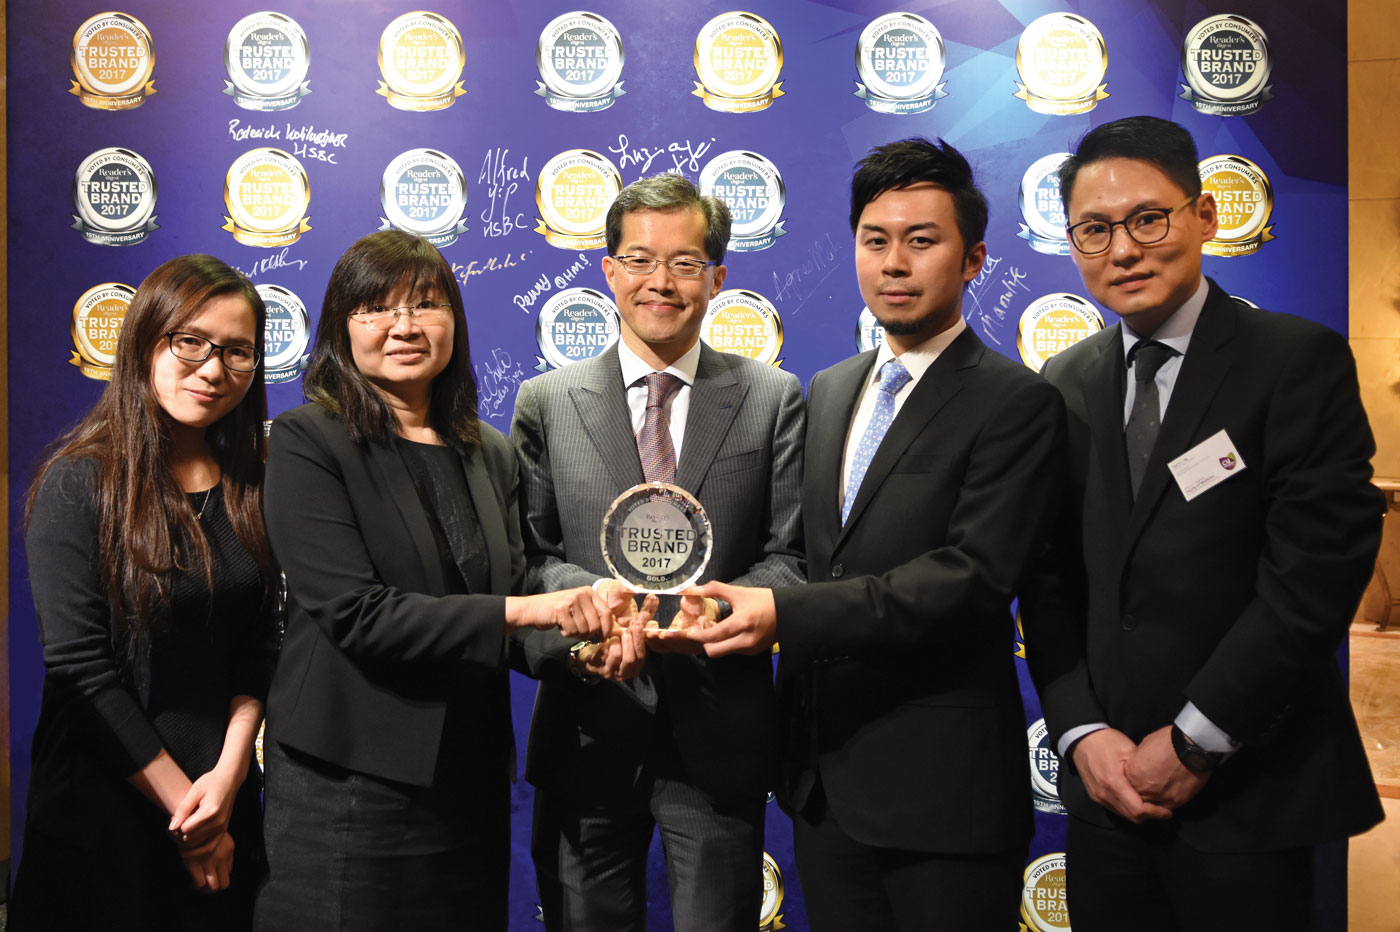 The CUHK Eye Centre Voted as Reader's Digest Trusted Brand 2017